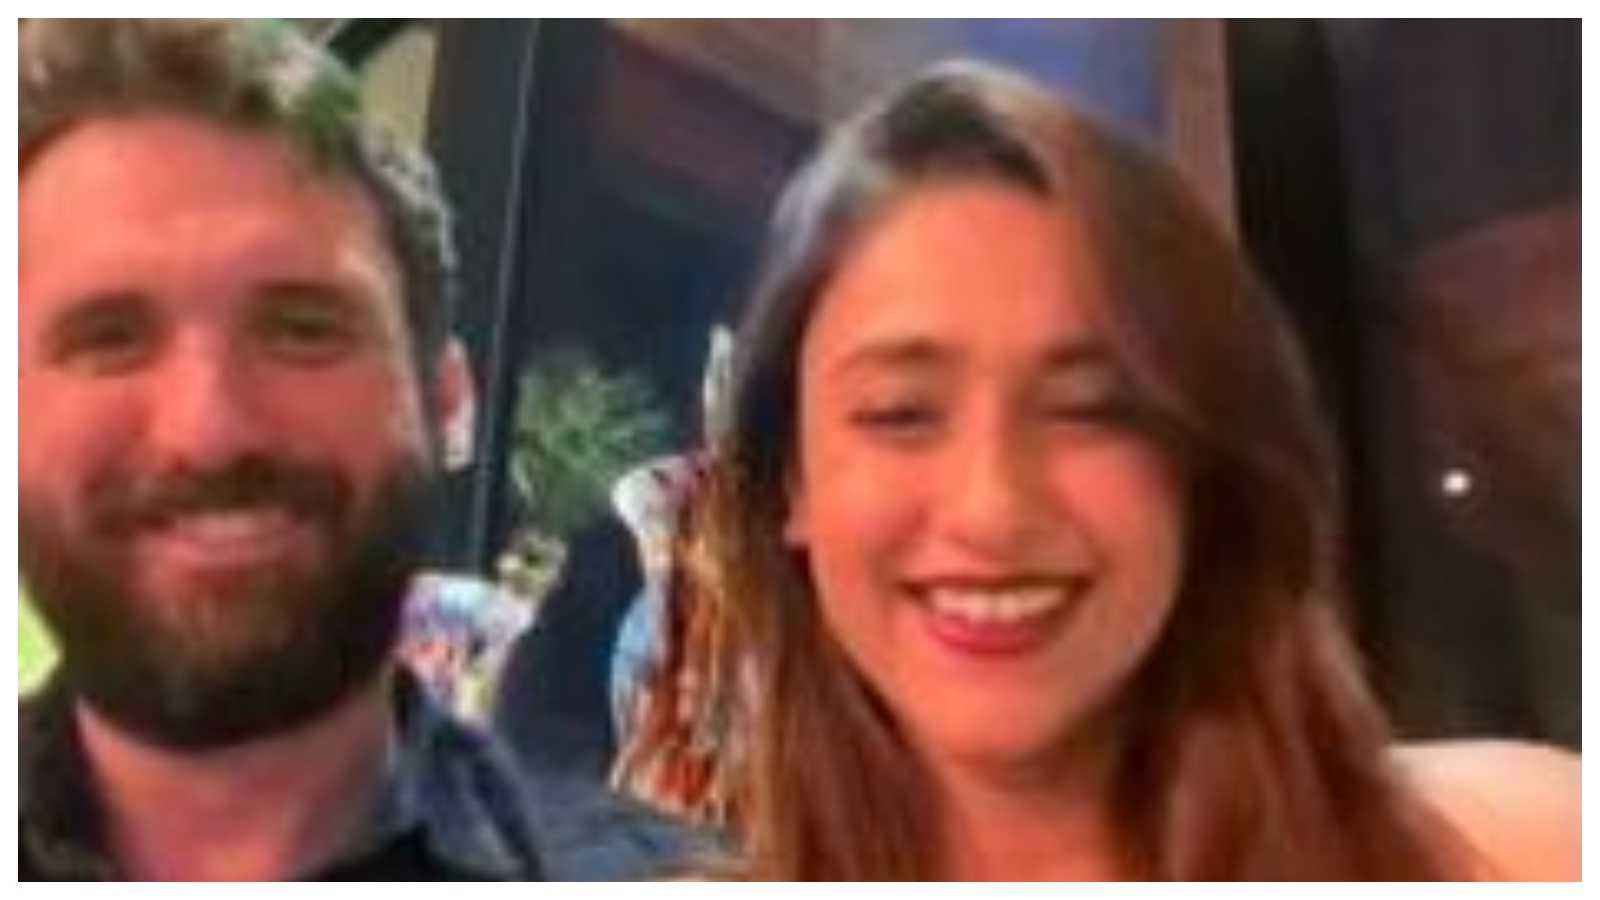 Mommy-to-be Ileana D'Cruz reveals her baby daddy with delightful pictures from their date night